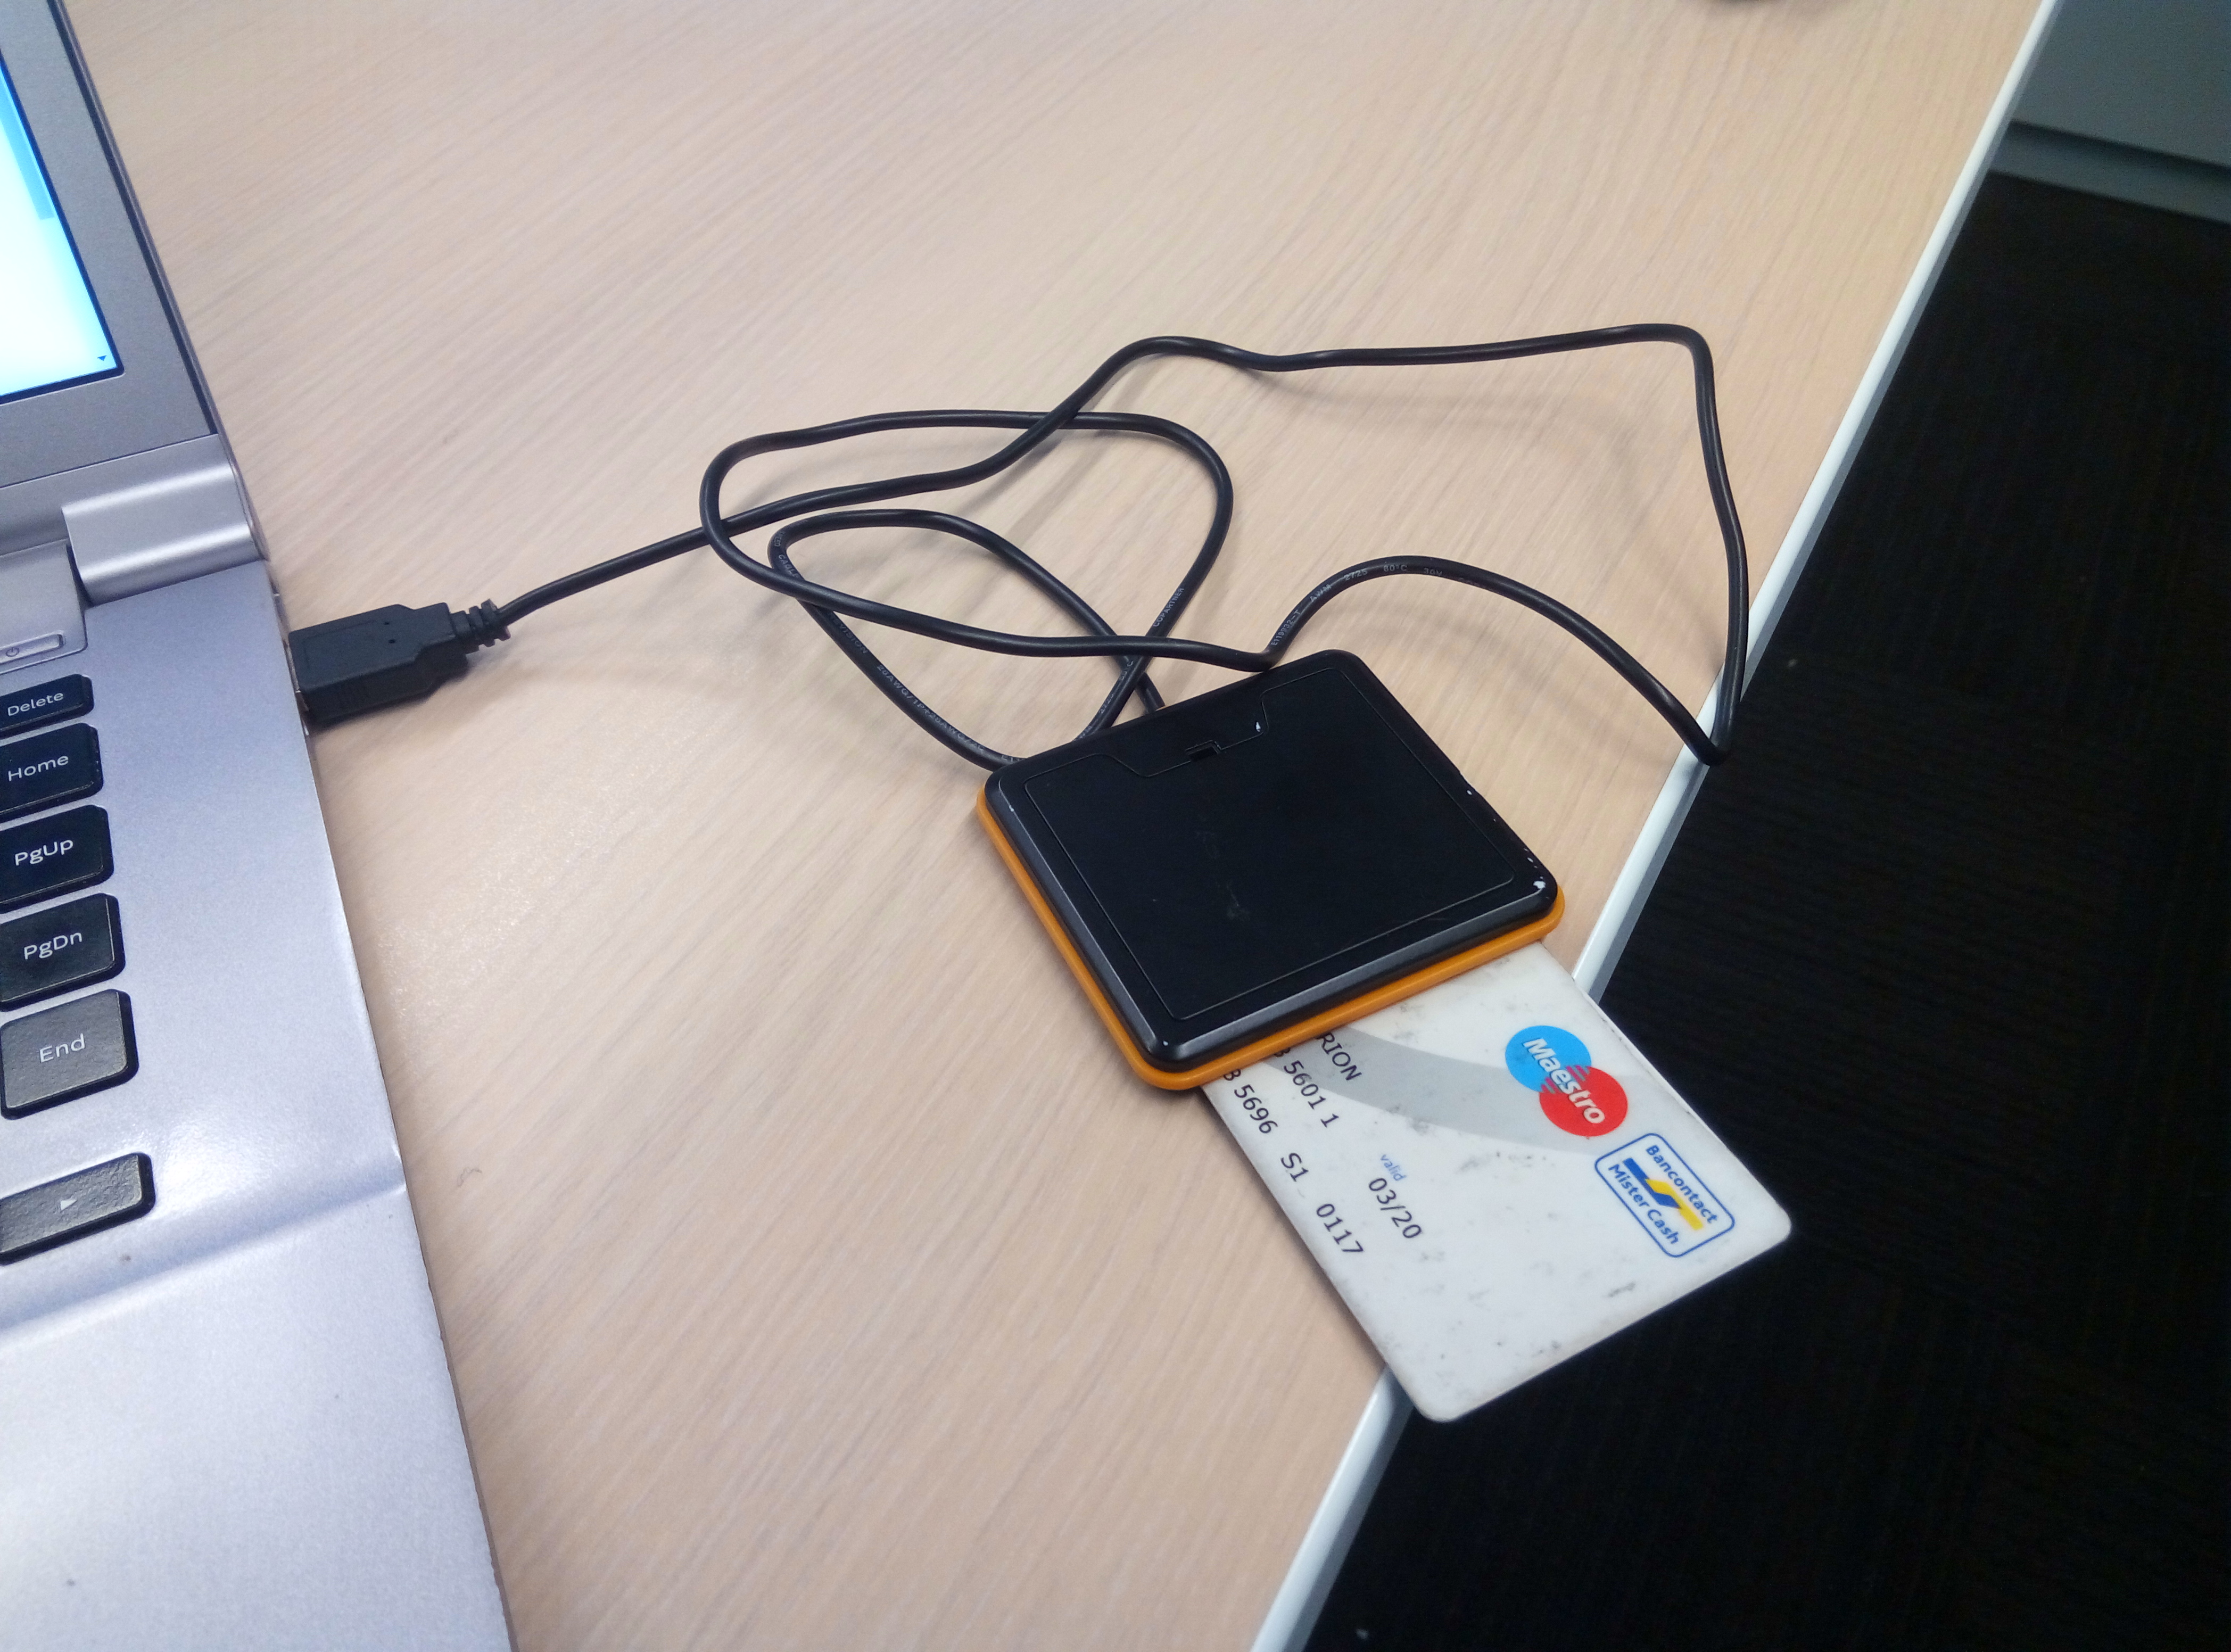 USB smartcard reader with a bank card